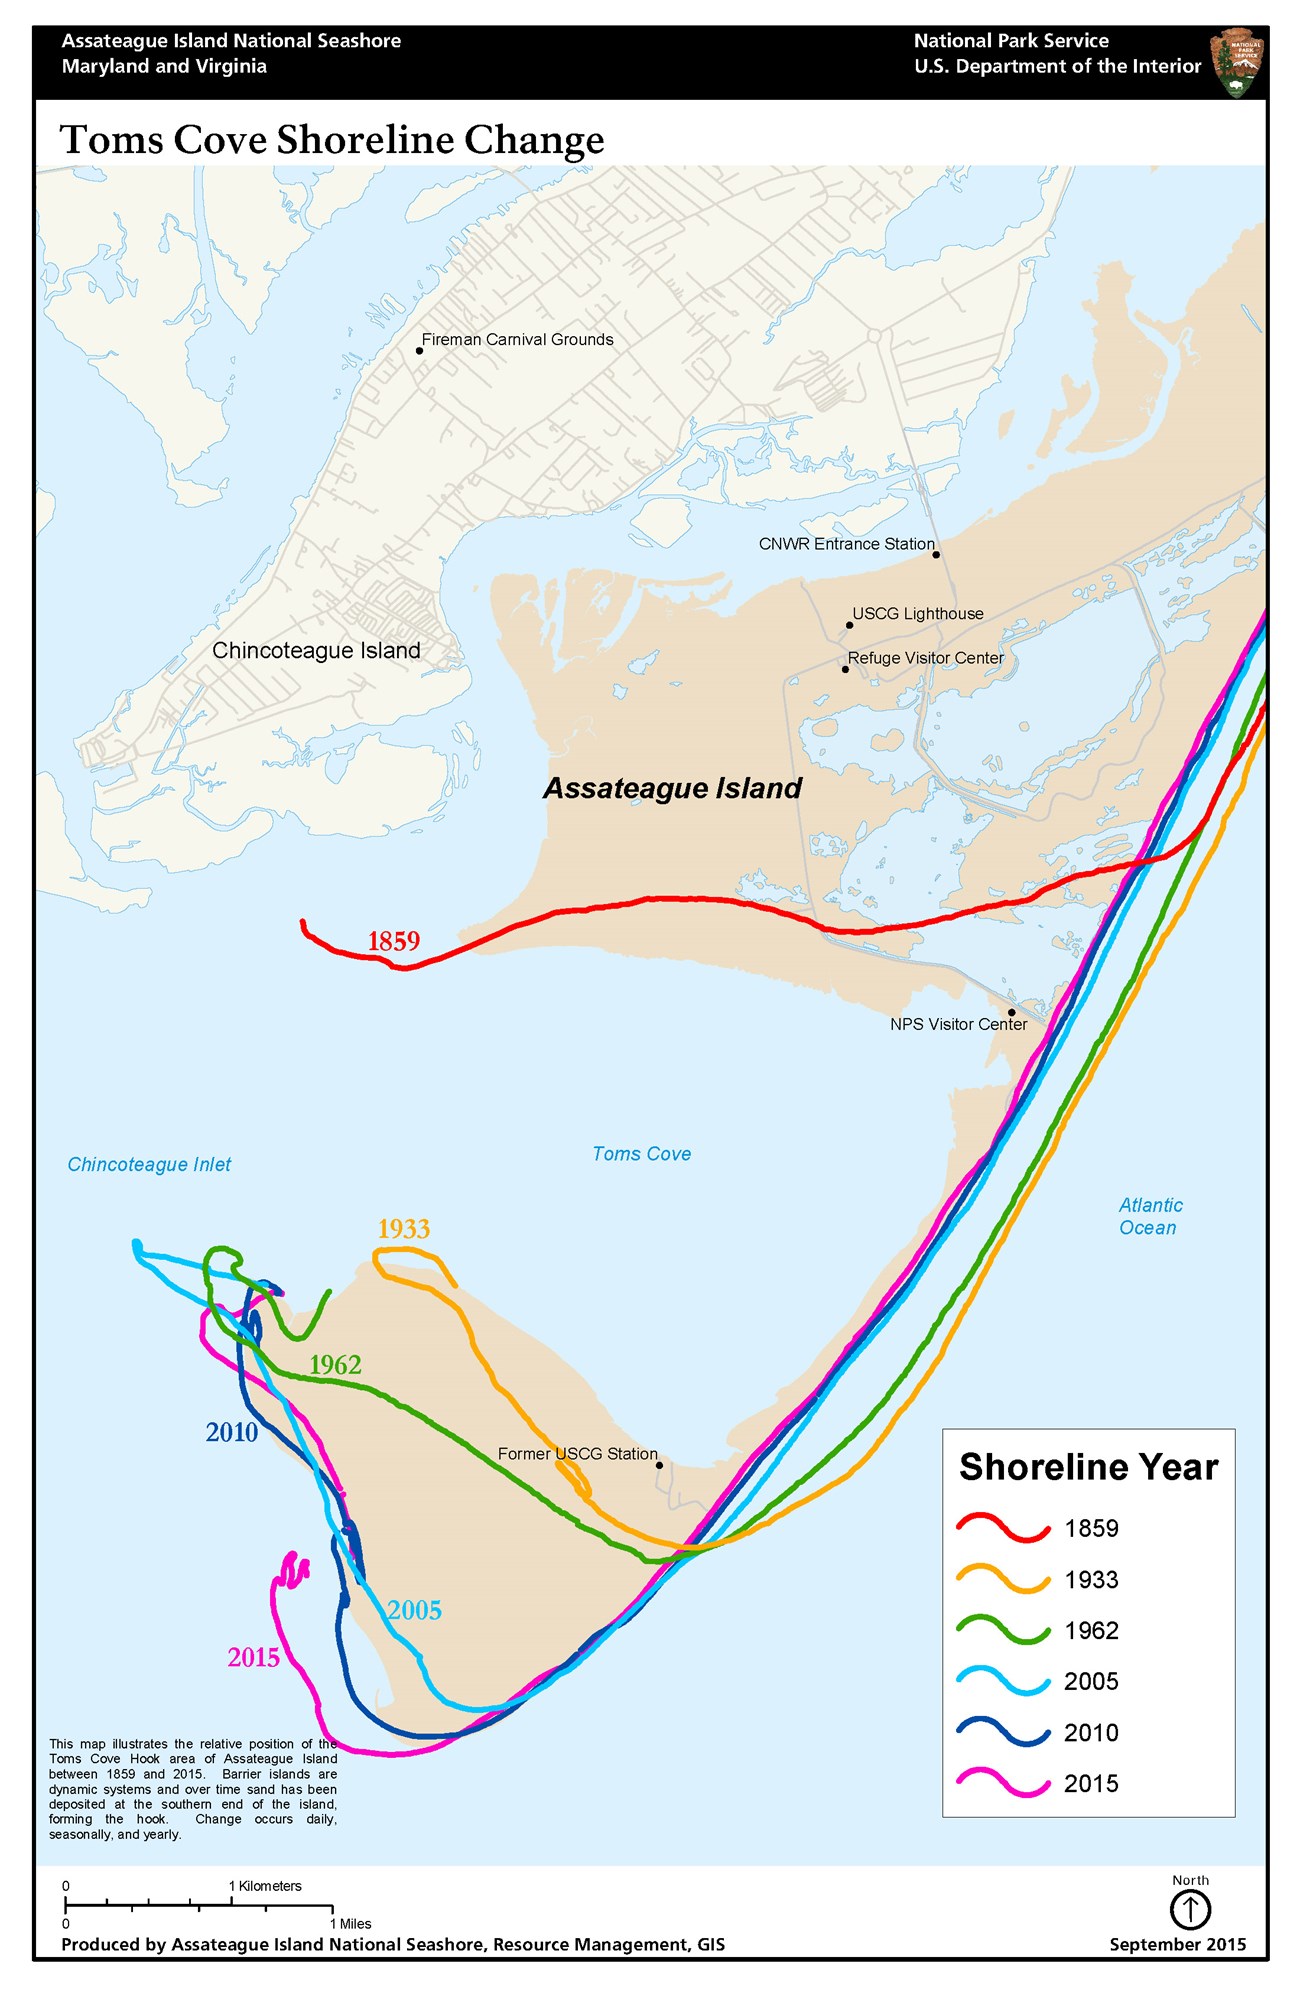 map showing shoreline changes to Toms Cove hook from 1859-2015